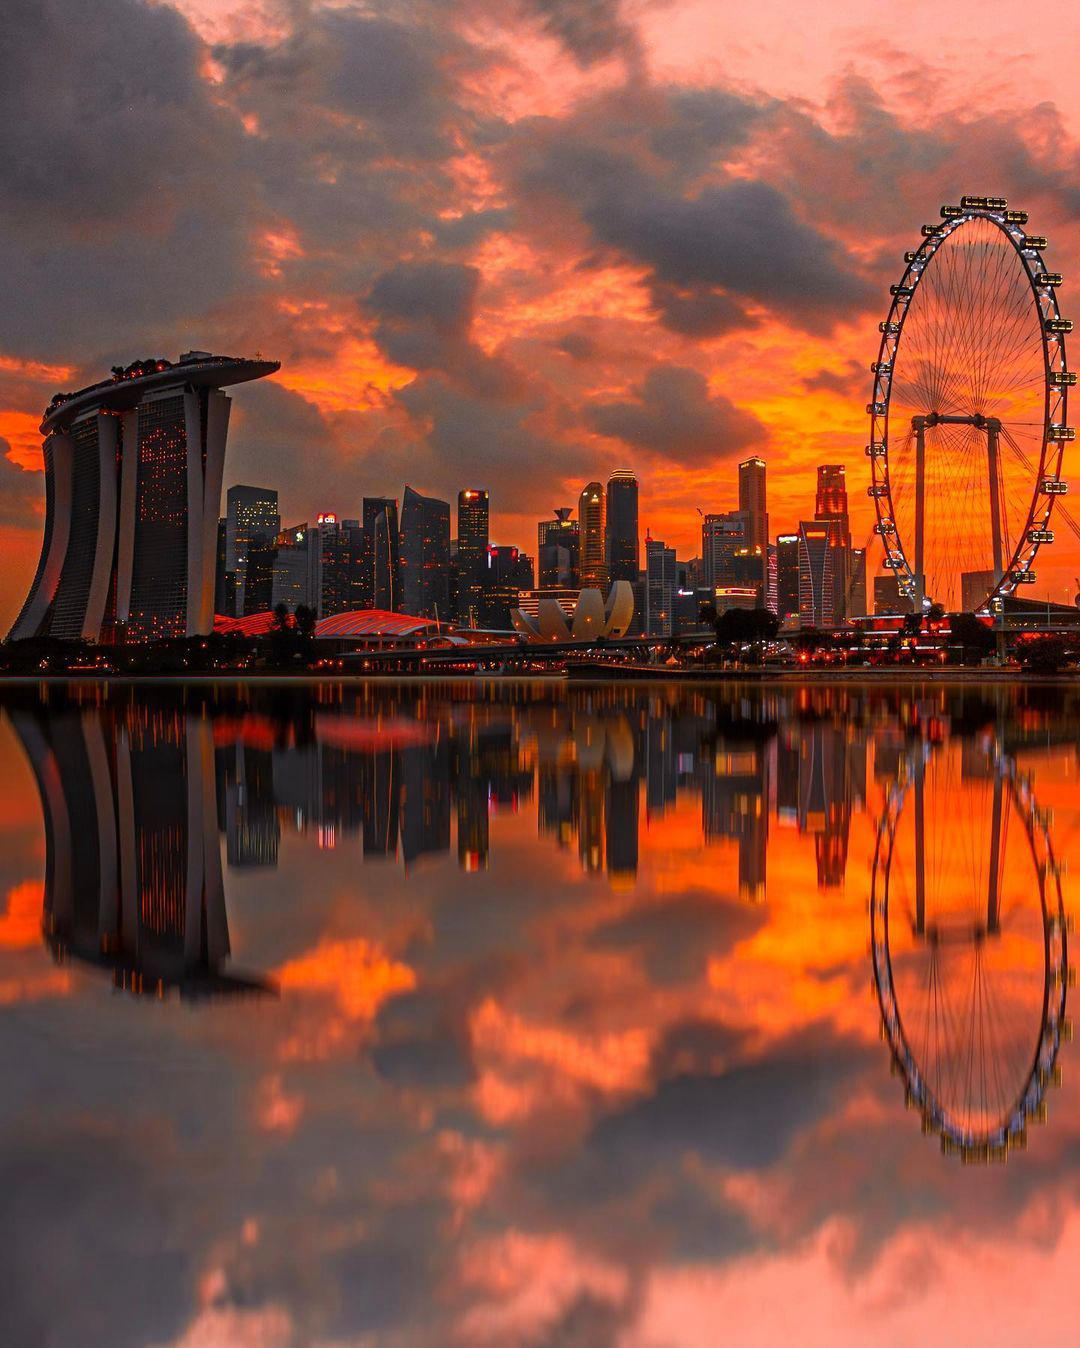 Marina Bay Sands - Every sunset is an opportunity to reset